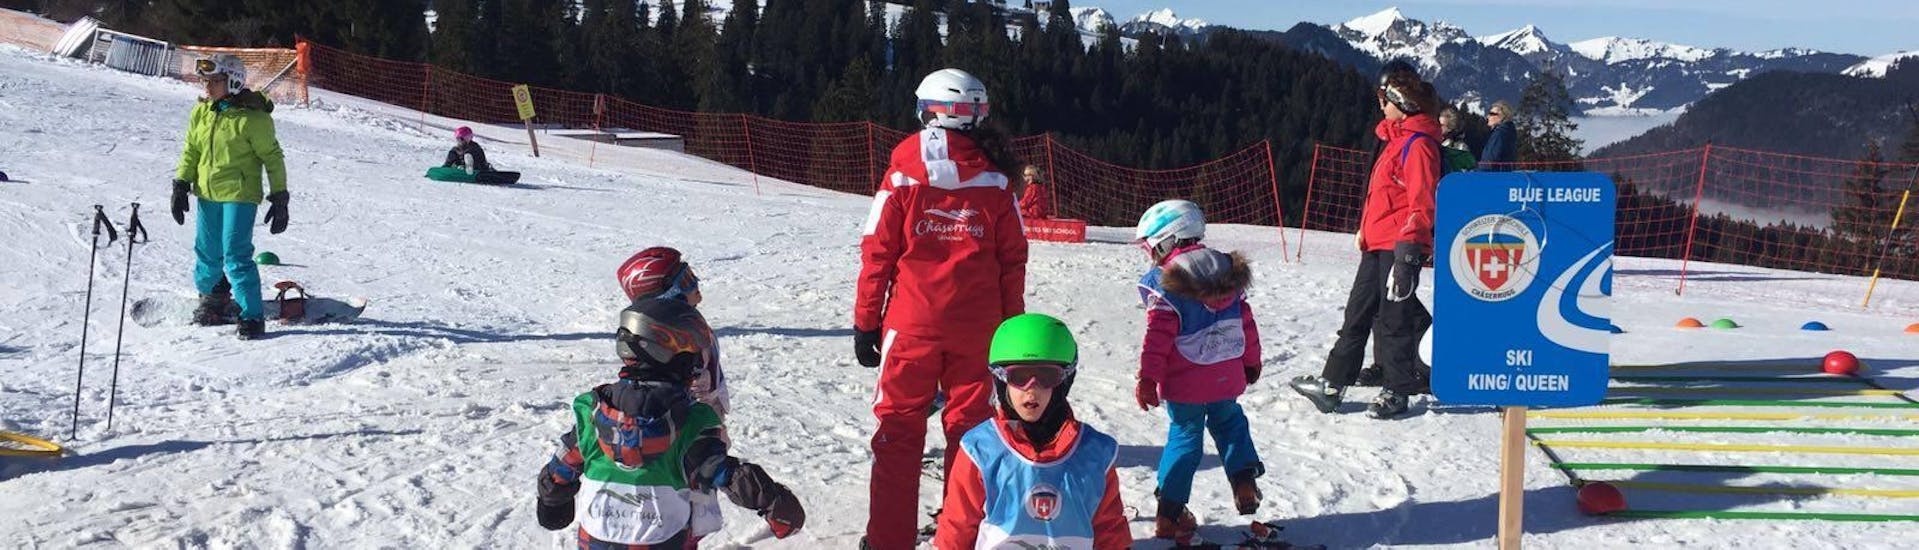 Young skiers are getting ready their Kids Ski Lessons (3-5 years) - Weekend - Beginners with Swiss Ski School Chäserrugg at the assemly point, where they meet their ski instructor.